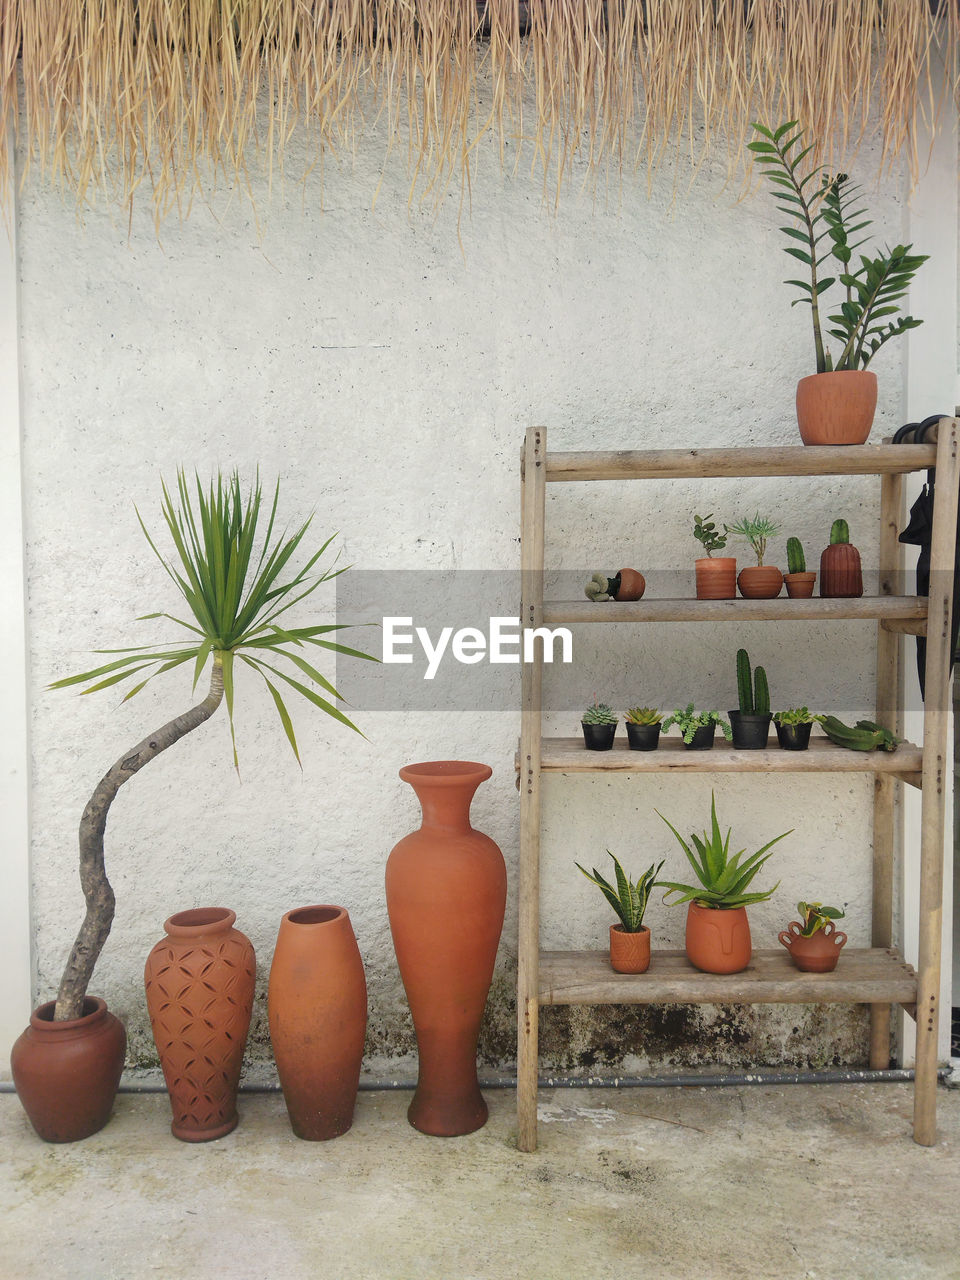 plant, potted plant, flowerpot, nature, wall, no people, houseplant, growth, wood, furniture, art, wall - building feature, vase, arrangement, indoors, day, food and drink, pottery, container, decoration, variation, architecture, food, shelf, flower